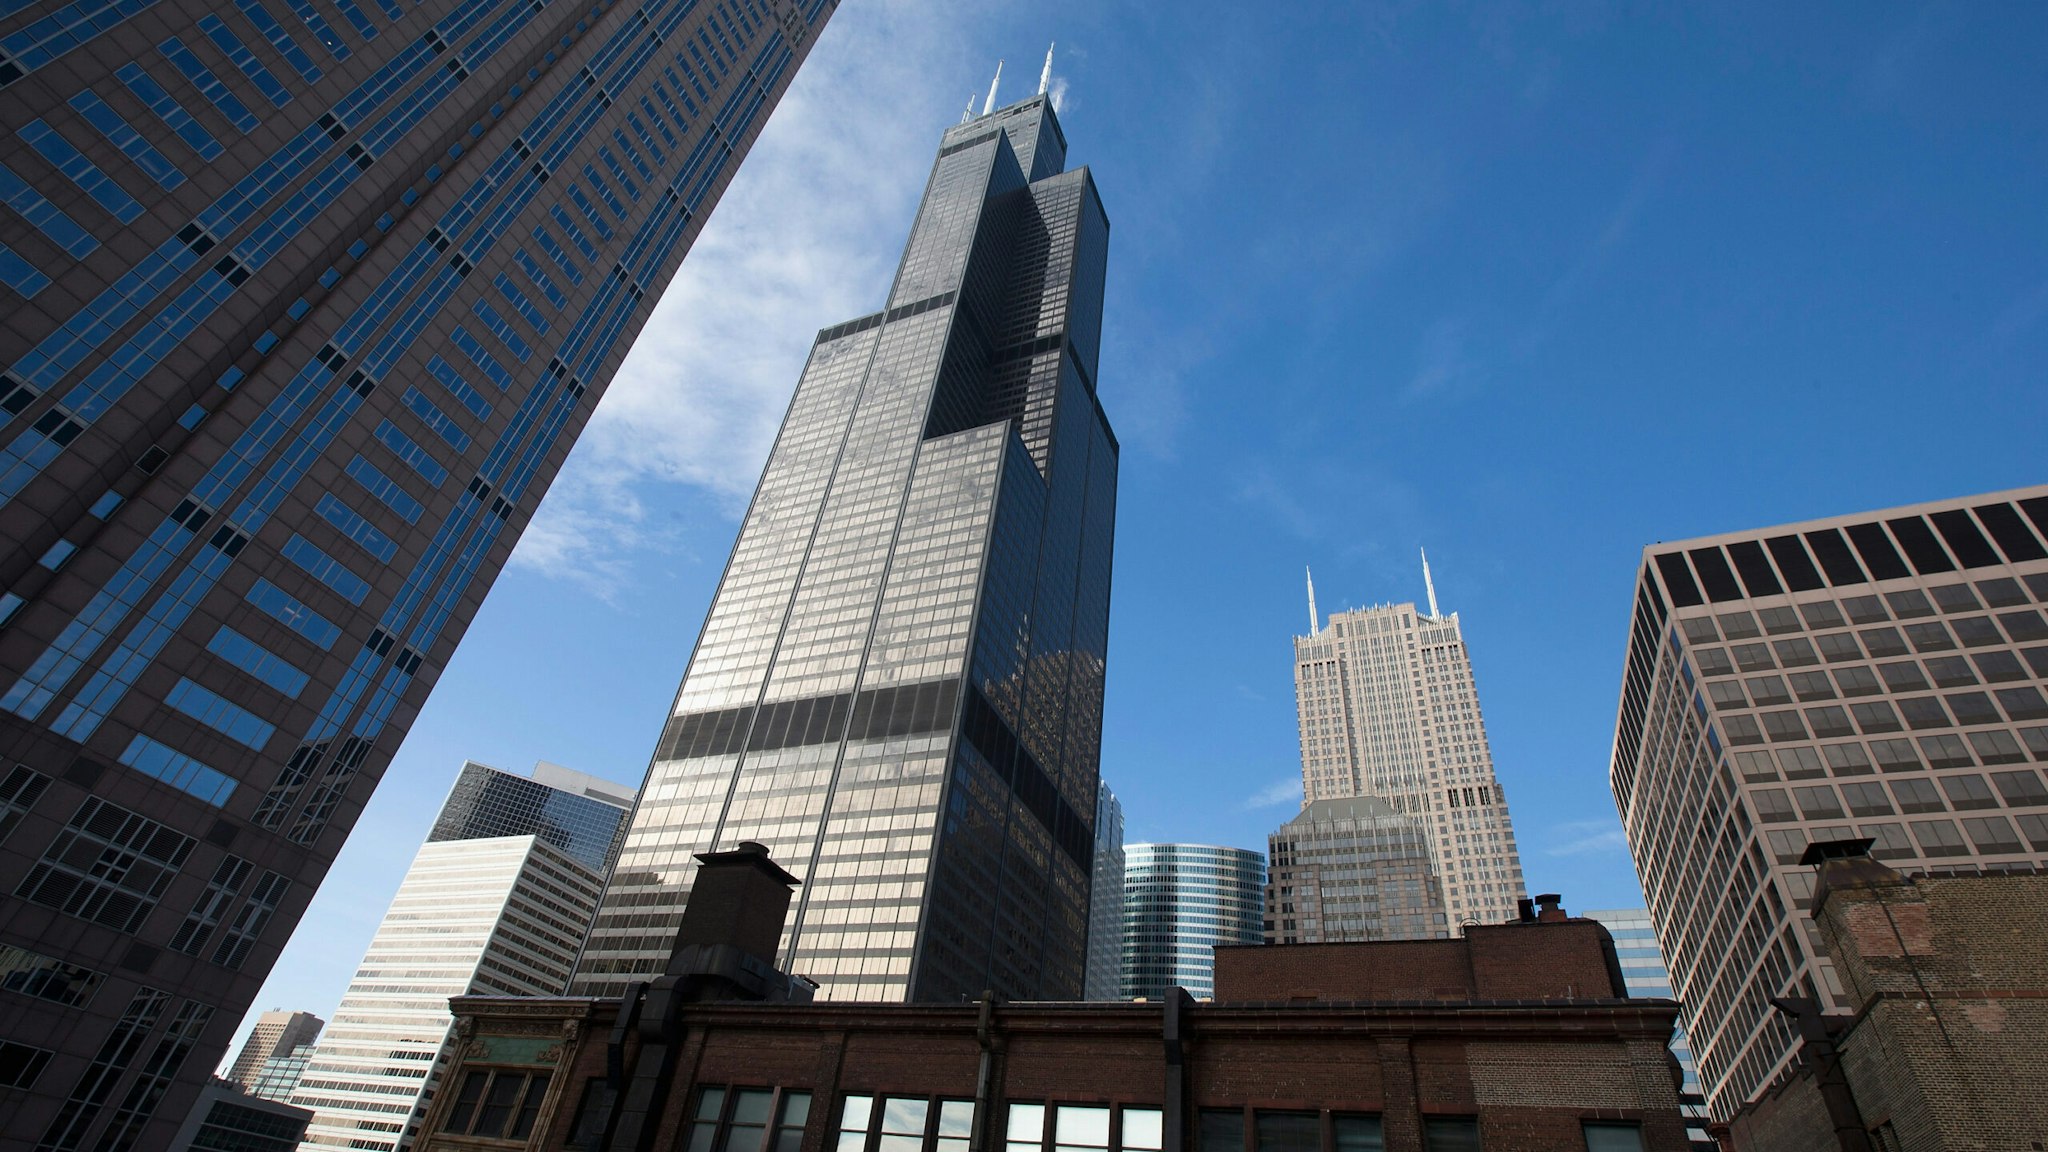 HICAGO, IL - MARCH 04: The Willis Tower (C), formerly known as the Sears Tower, dominates the southern end of the downtown skyline on March 4, 2015 in Chicago, Illinois. The building, completed in 1973, was the world's tallest for more than two decades. It is reported to be up for sale with an asking price of $1.5 billion. (Photo by Scott Olson/Getty Images)